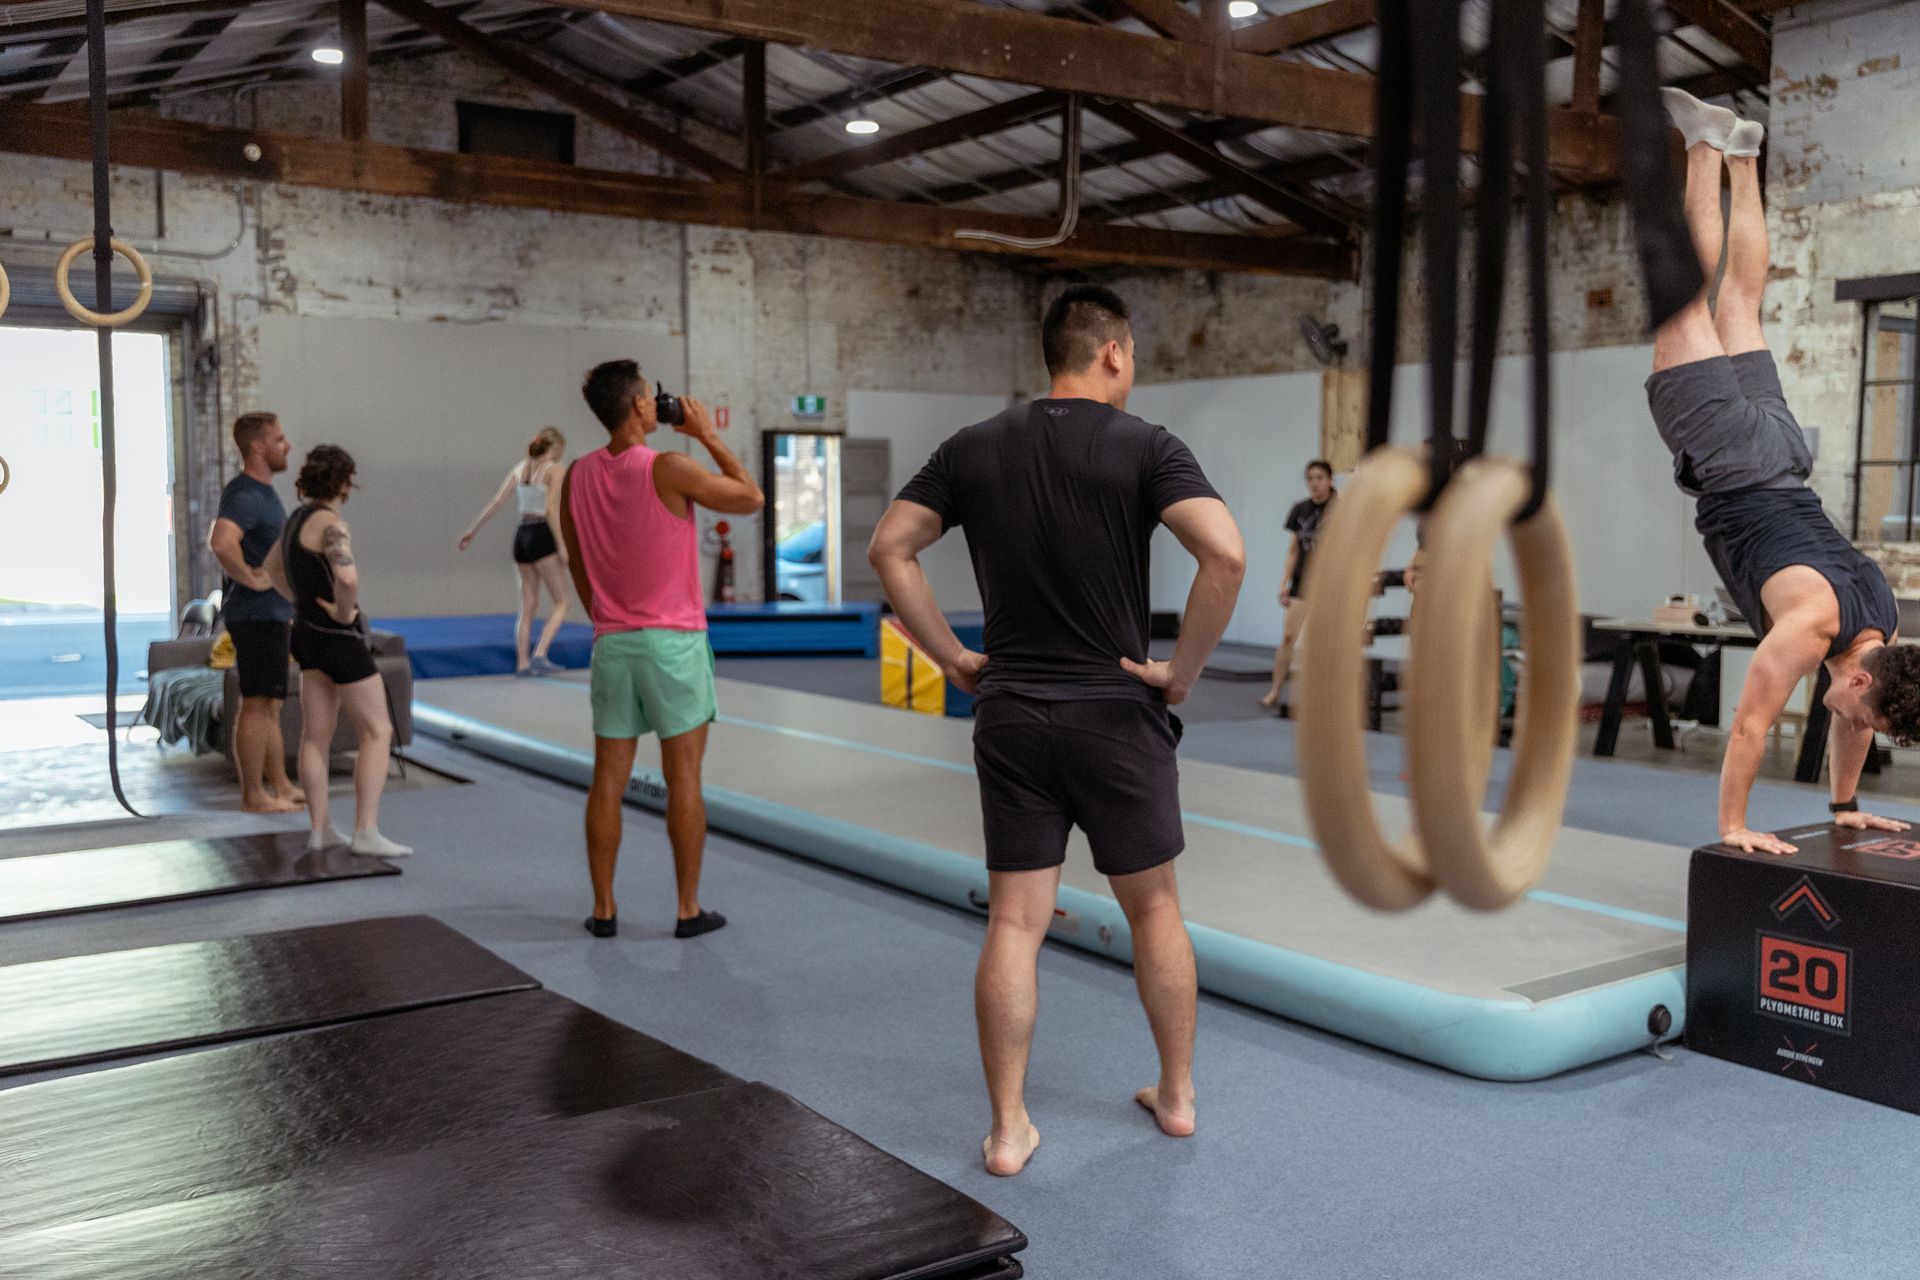 Image of people doing gymnastics in the gym